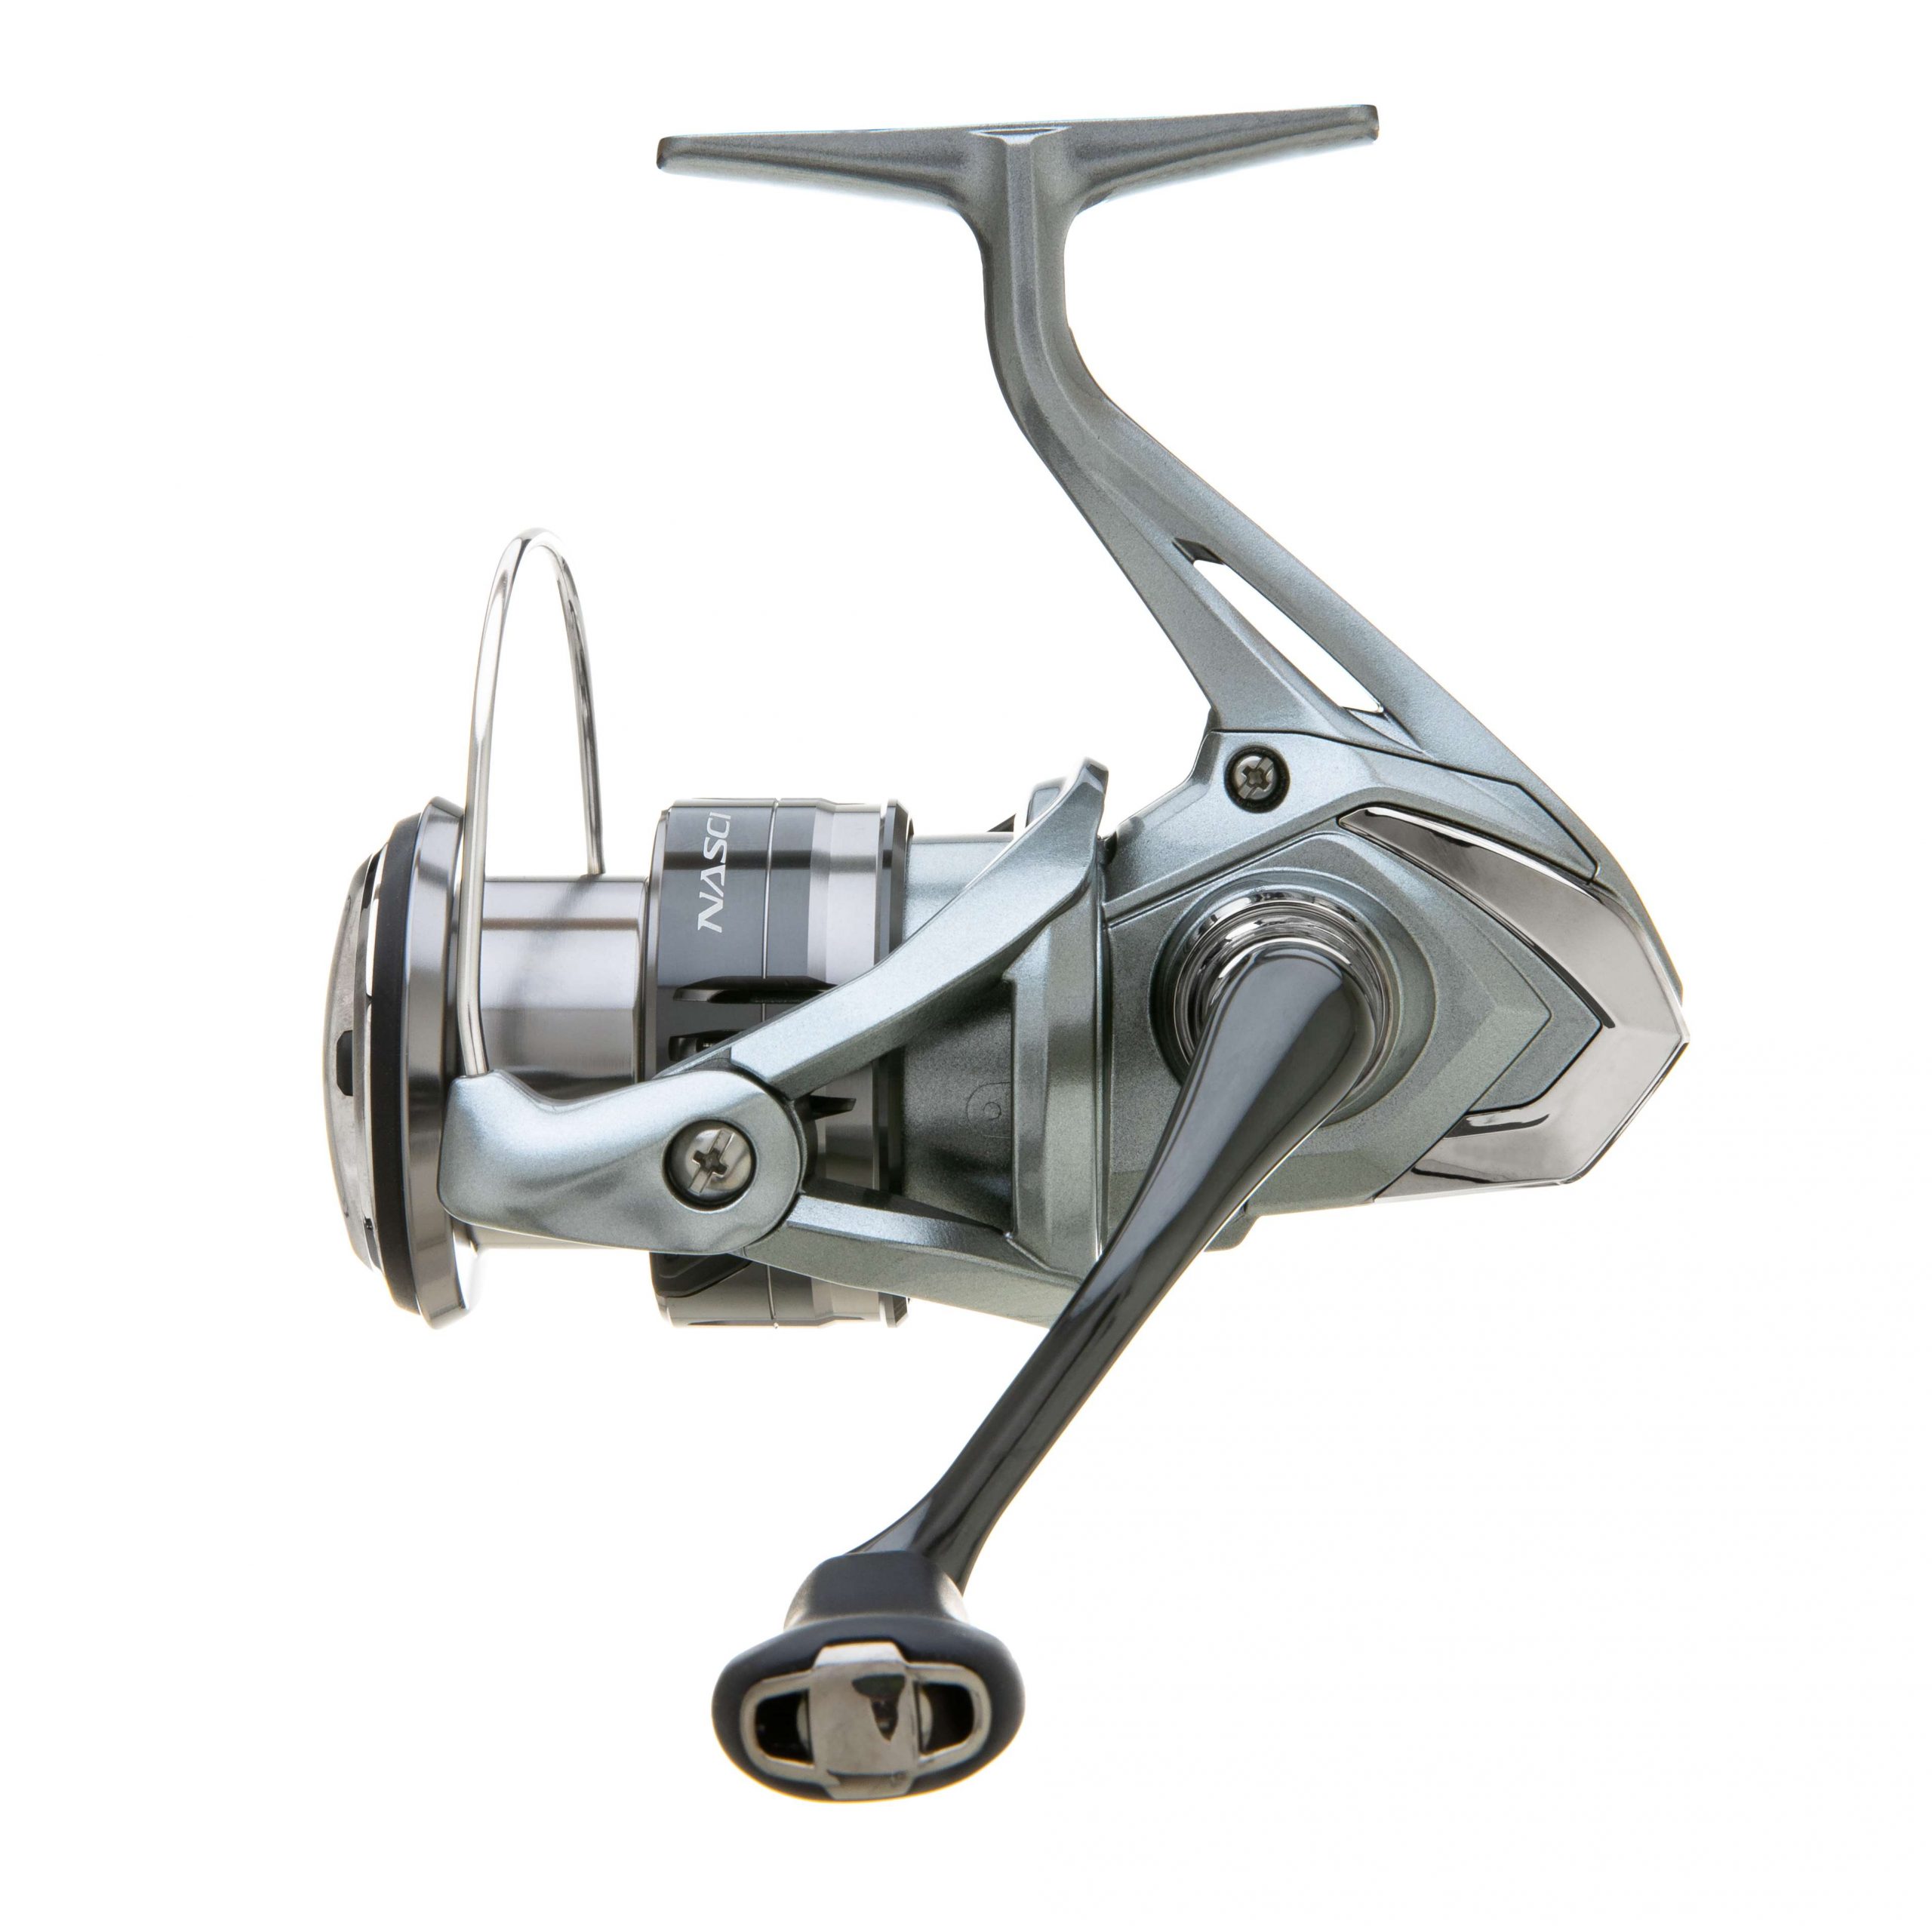 NASCI 2500 spinning reel review. 